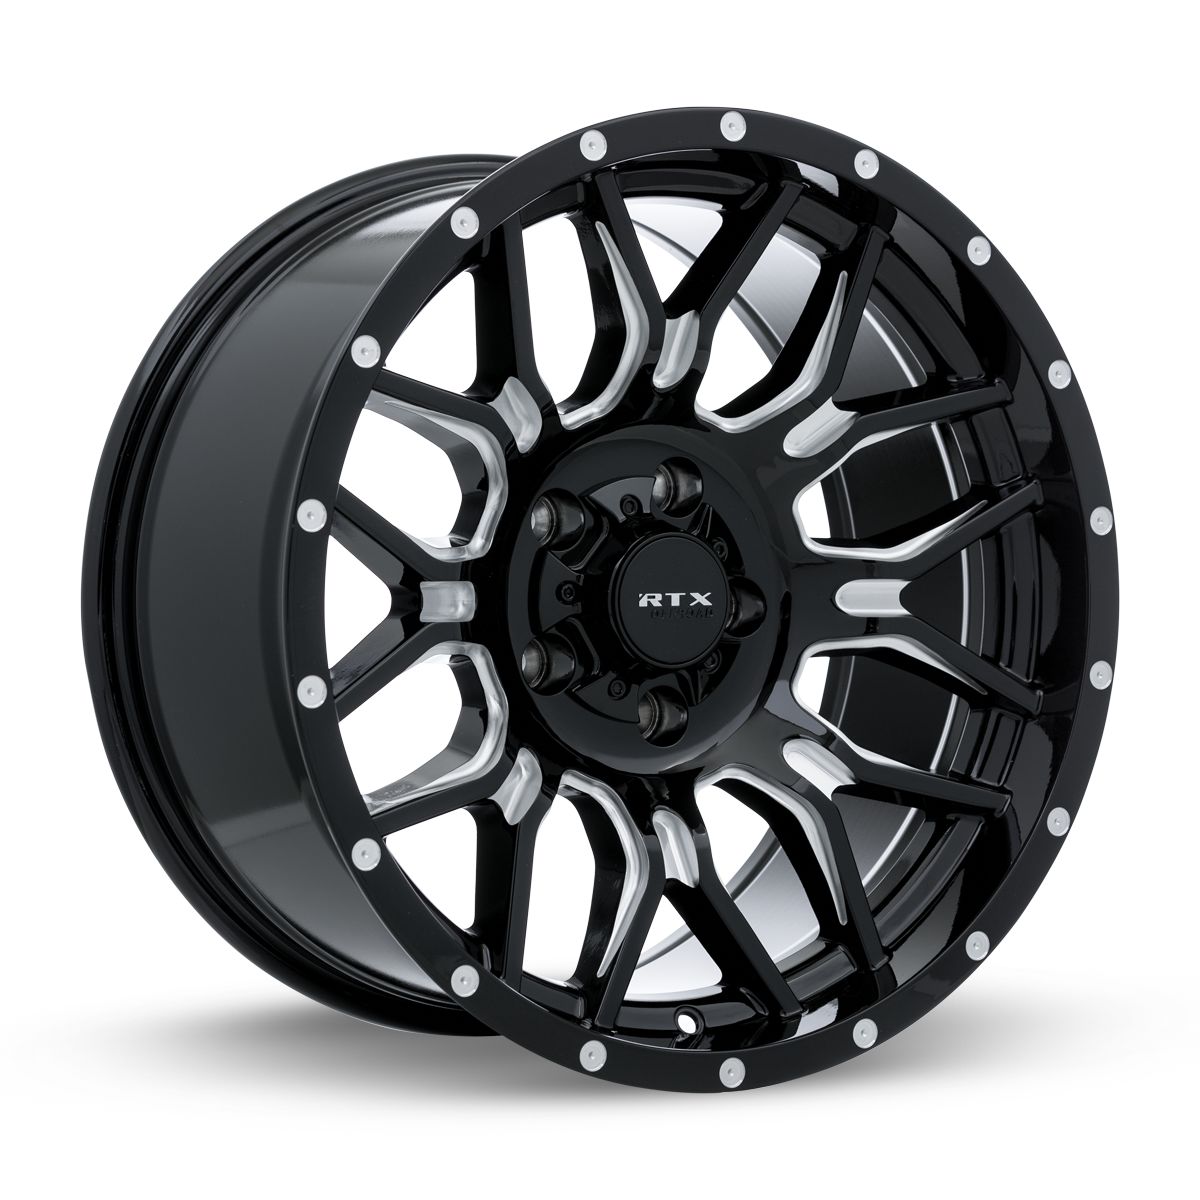 Claw • Gloss Black Milled with Rivets • 20x9 6x139.7 ET0 CB106.1